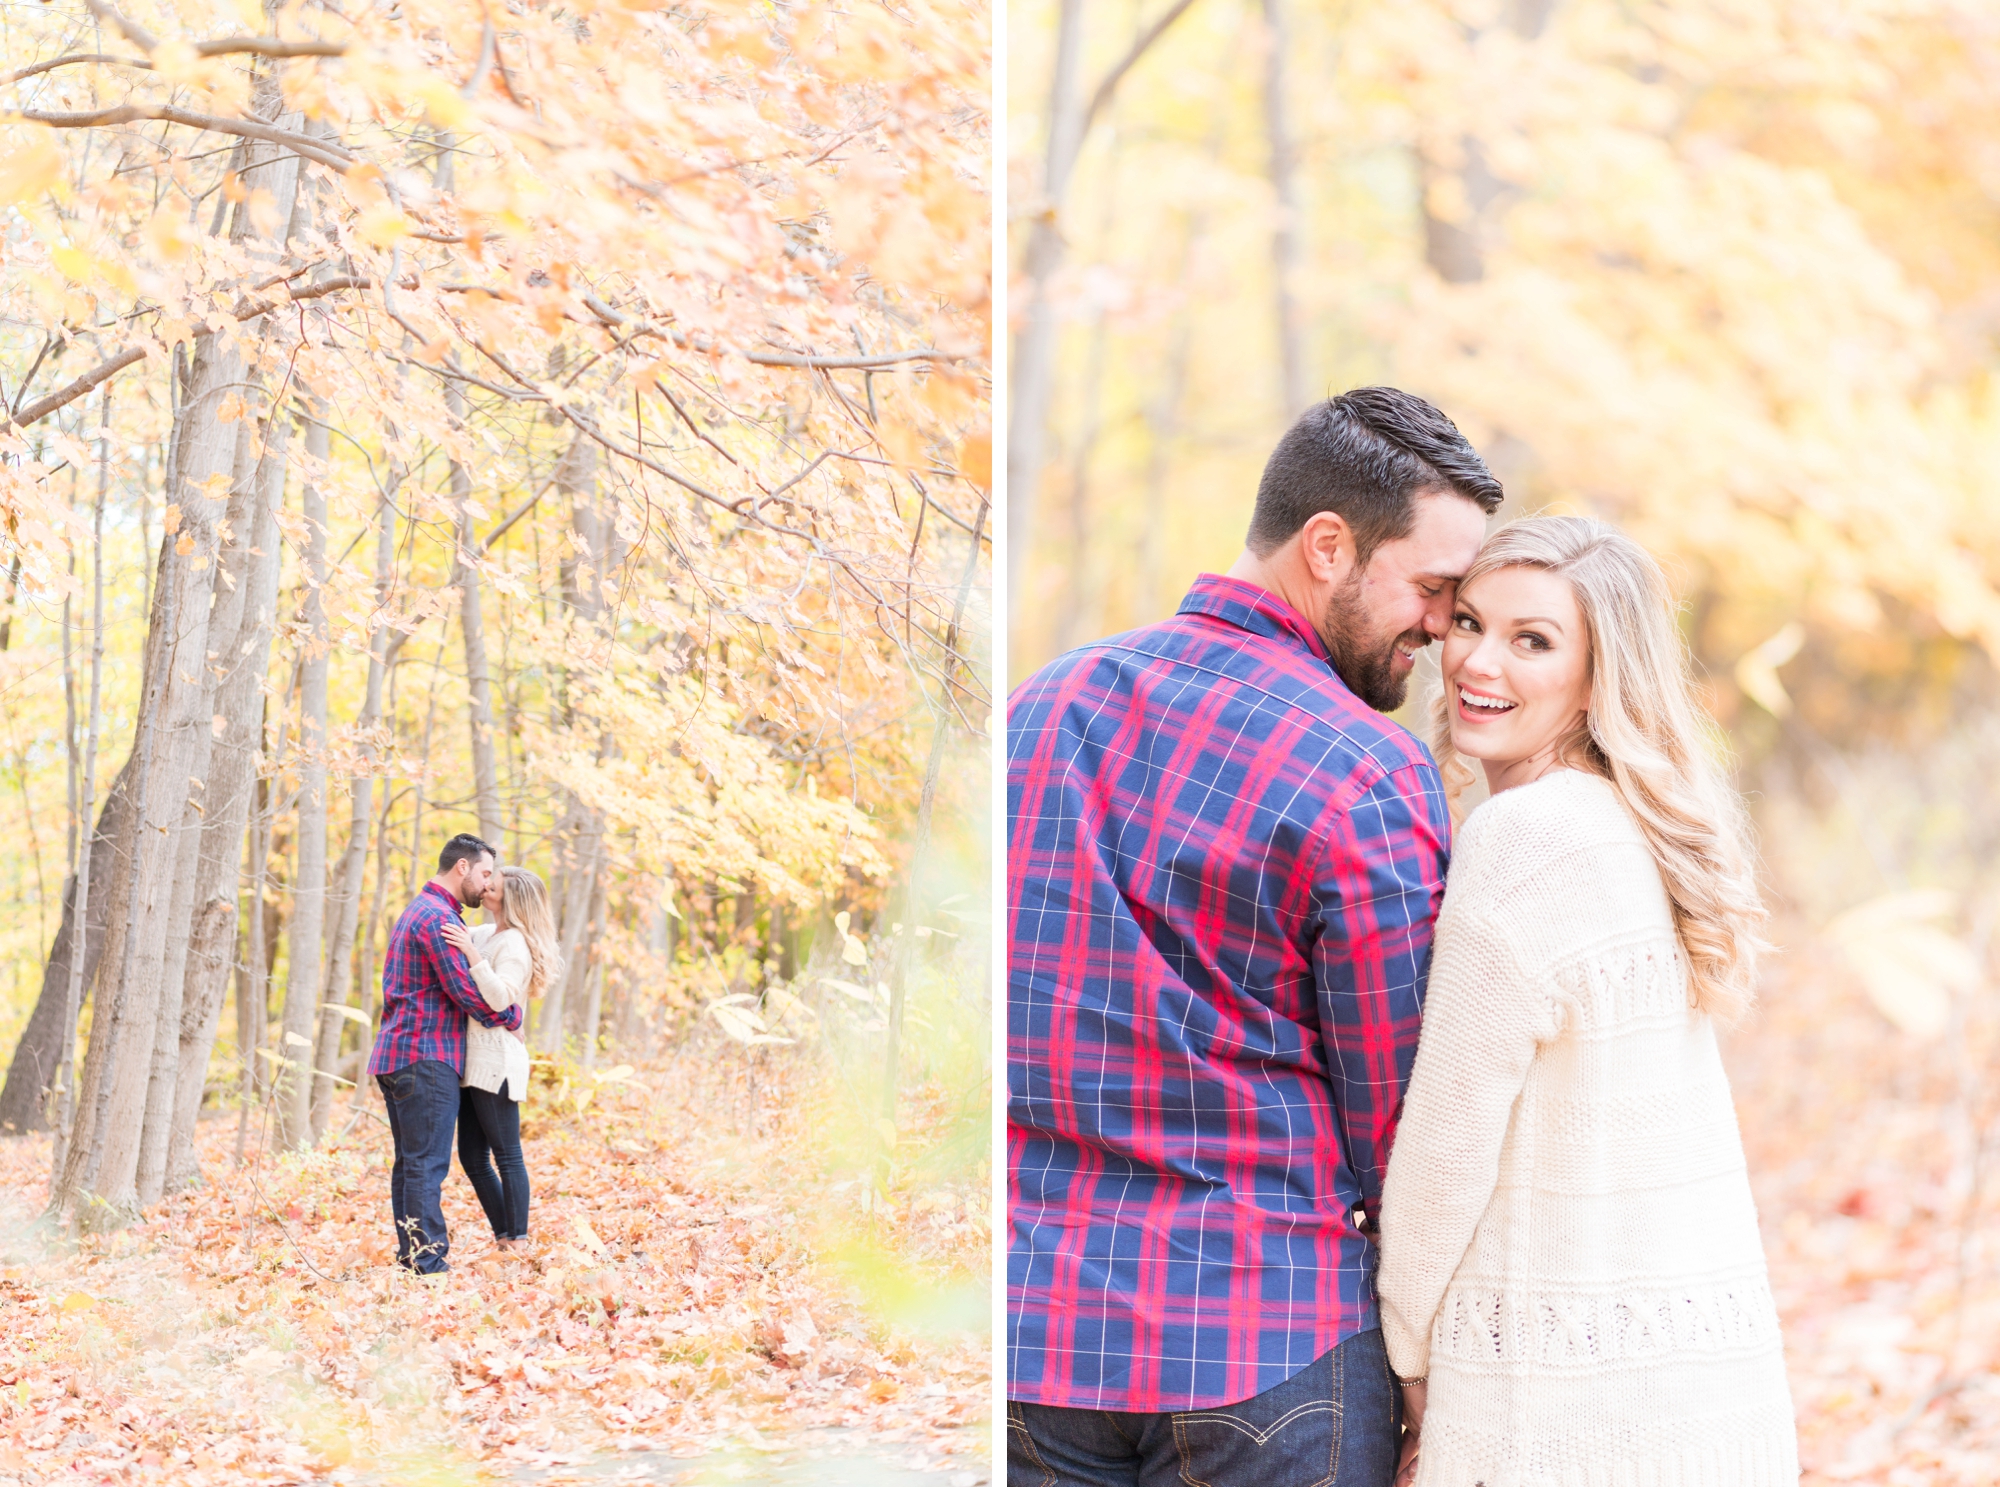 photography-blog-with-tips-for-engaged-couples